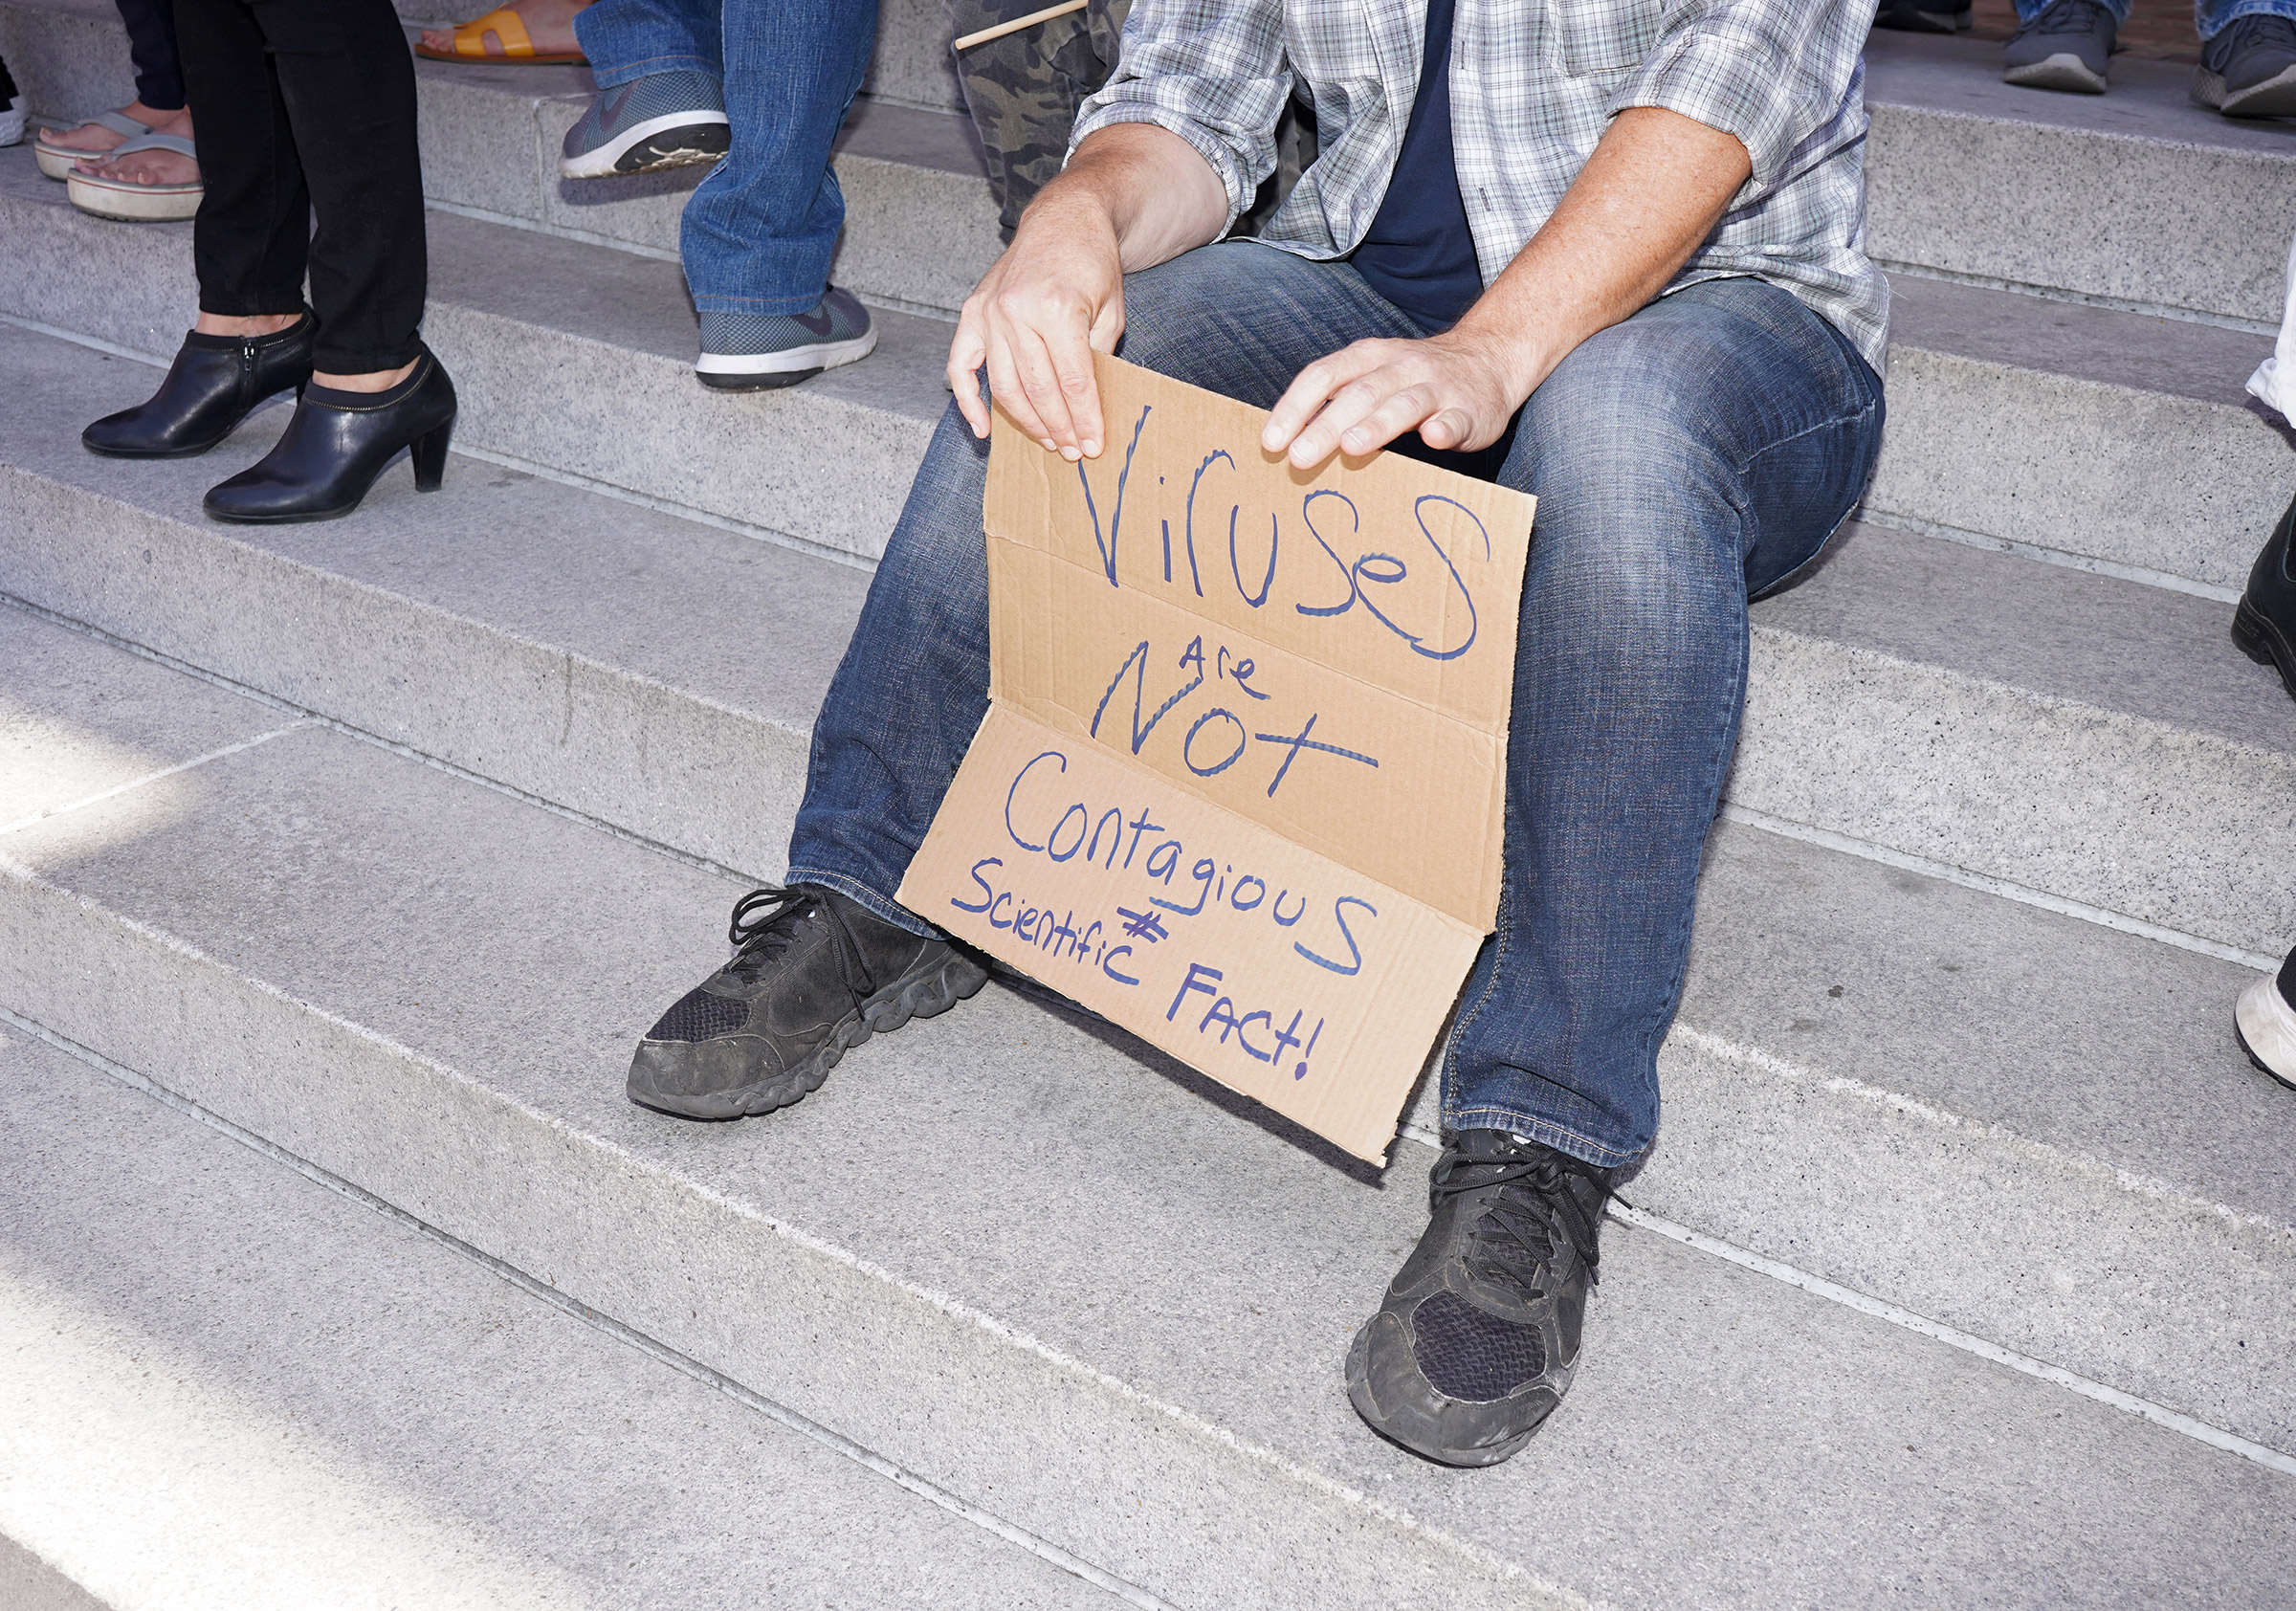 A protestor's sign at a rally calling for the reopening of California from coronavirus lockdown measures in Los Angeles, May 24, 2020. (Jamie Lee Curtis Taete)